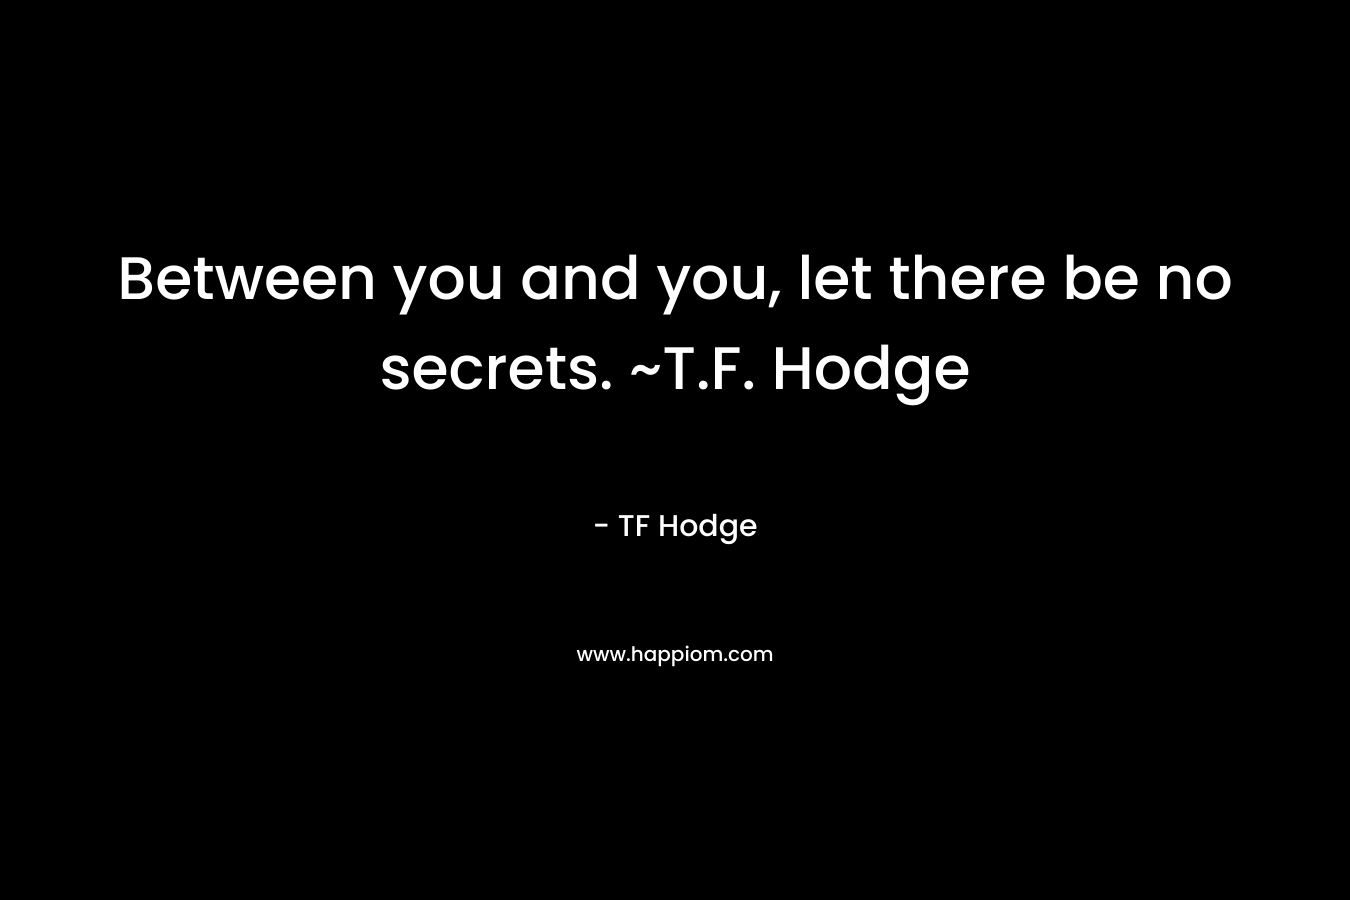 Between you and you, let there be no secrets. ~T.F. Hodge